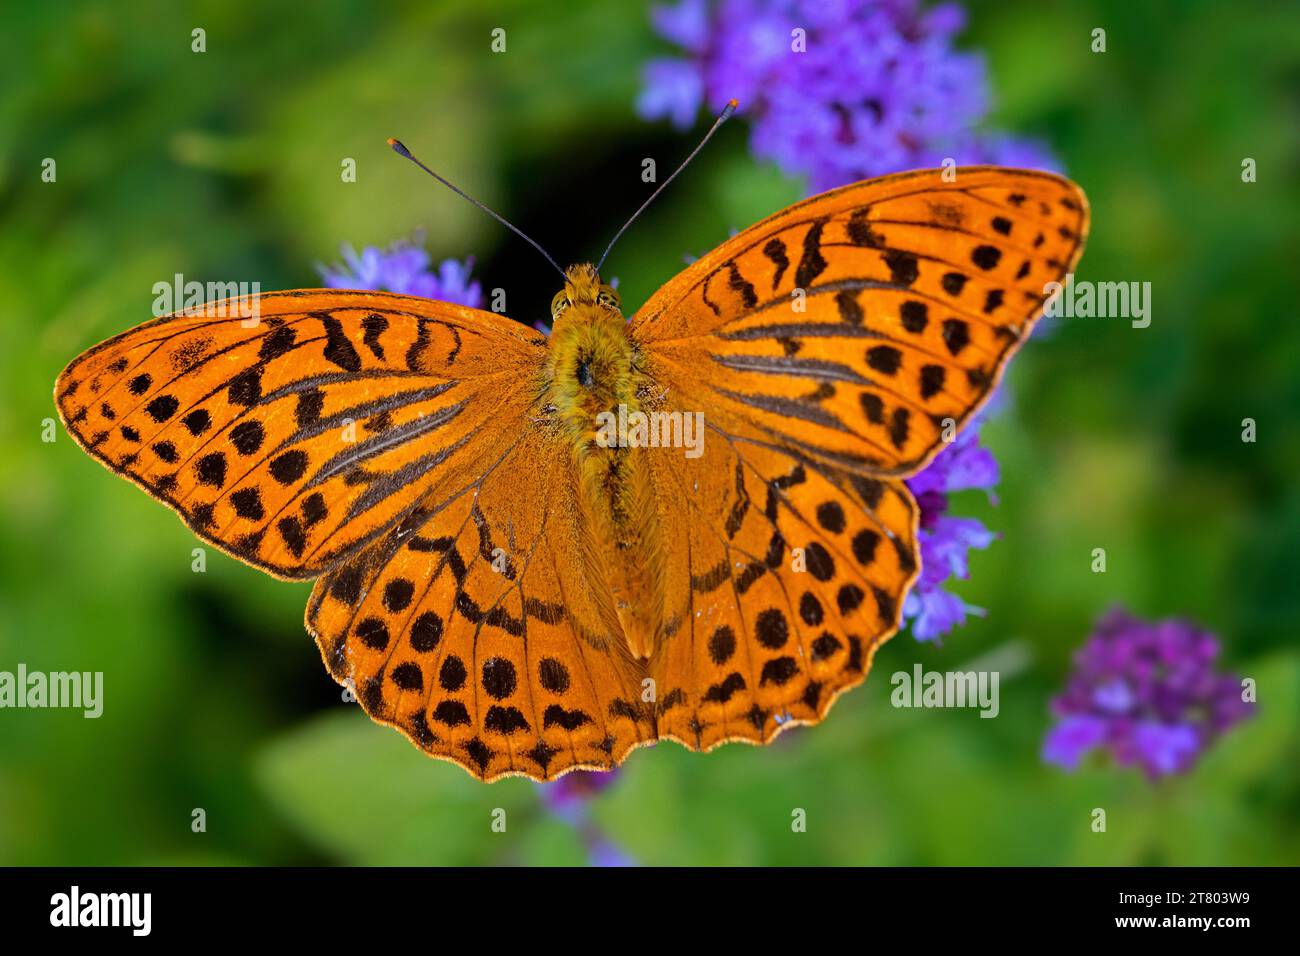 Silver-washed fritillary (Argynnis paphia) male butterfly feeding on nectar from flower in summer Stock Photo